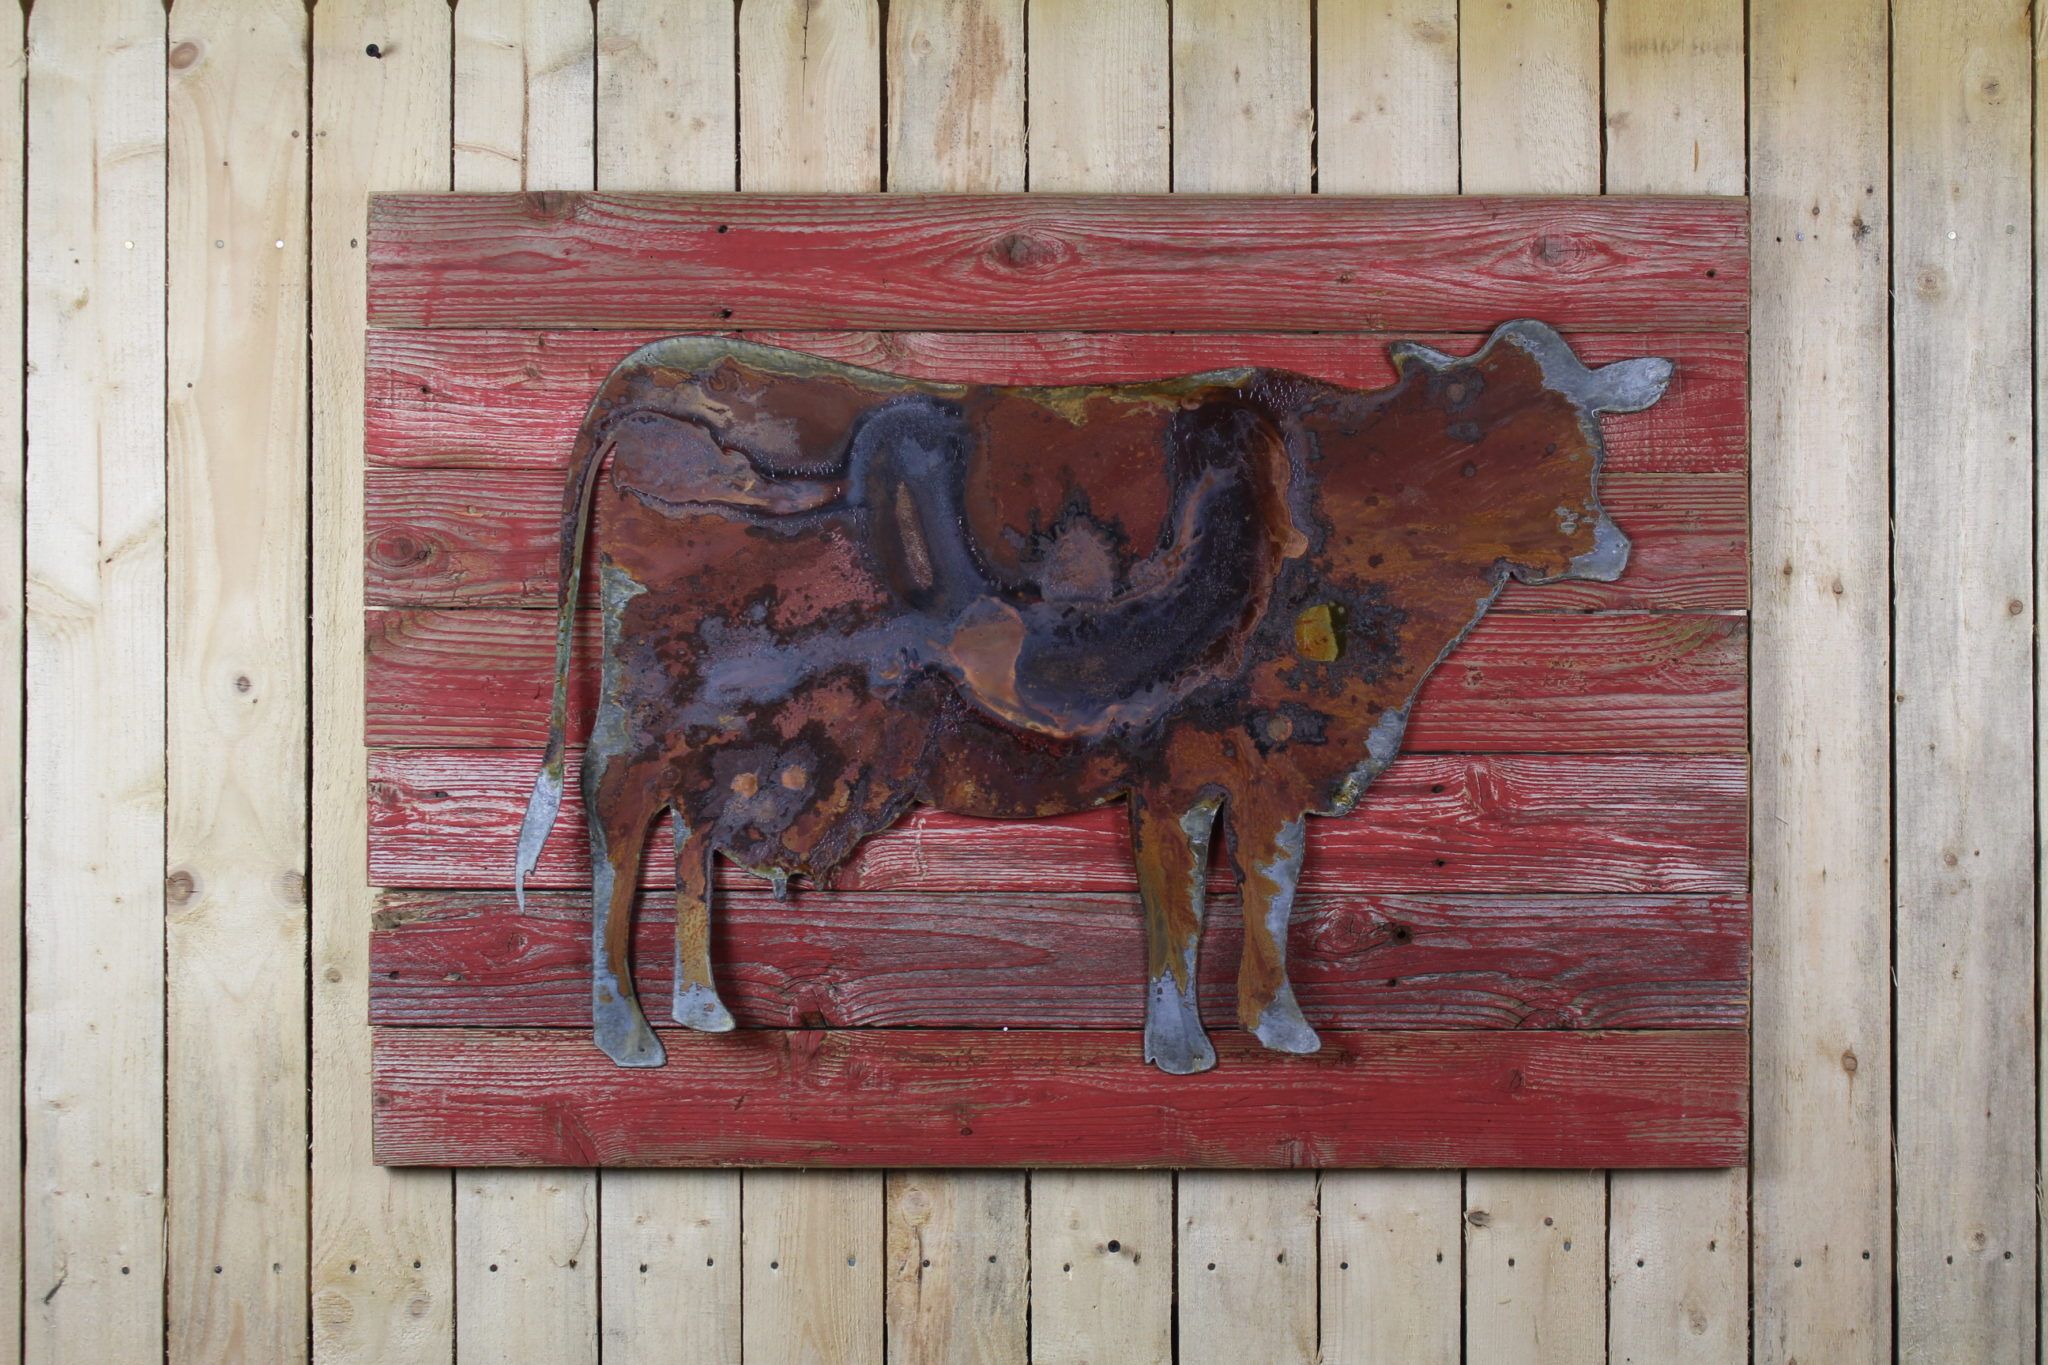 Cow On Wood Back – Rustic Metal Letters & Wall Art Throughout Current Metallic Rugged Wooden Wall Art (View 9 of 20)